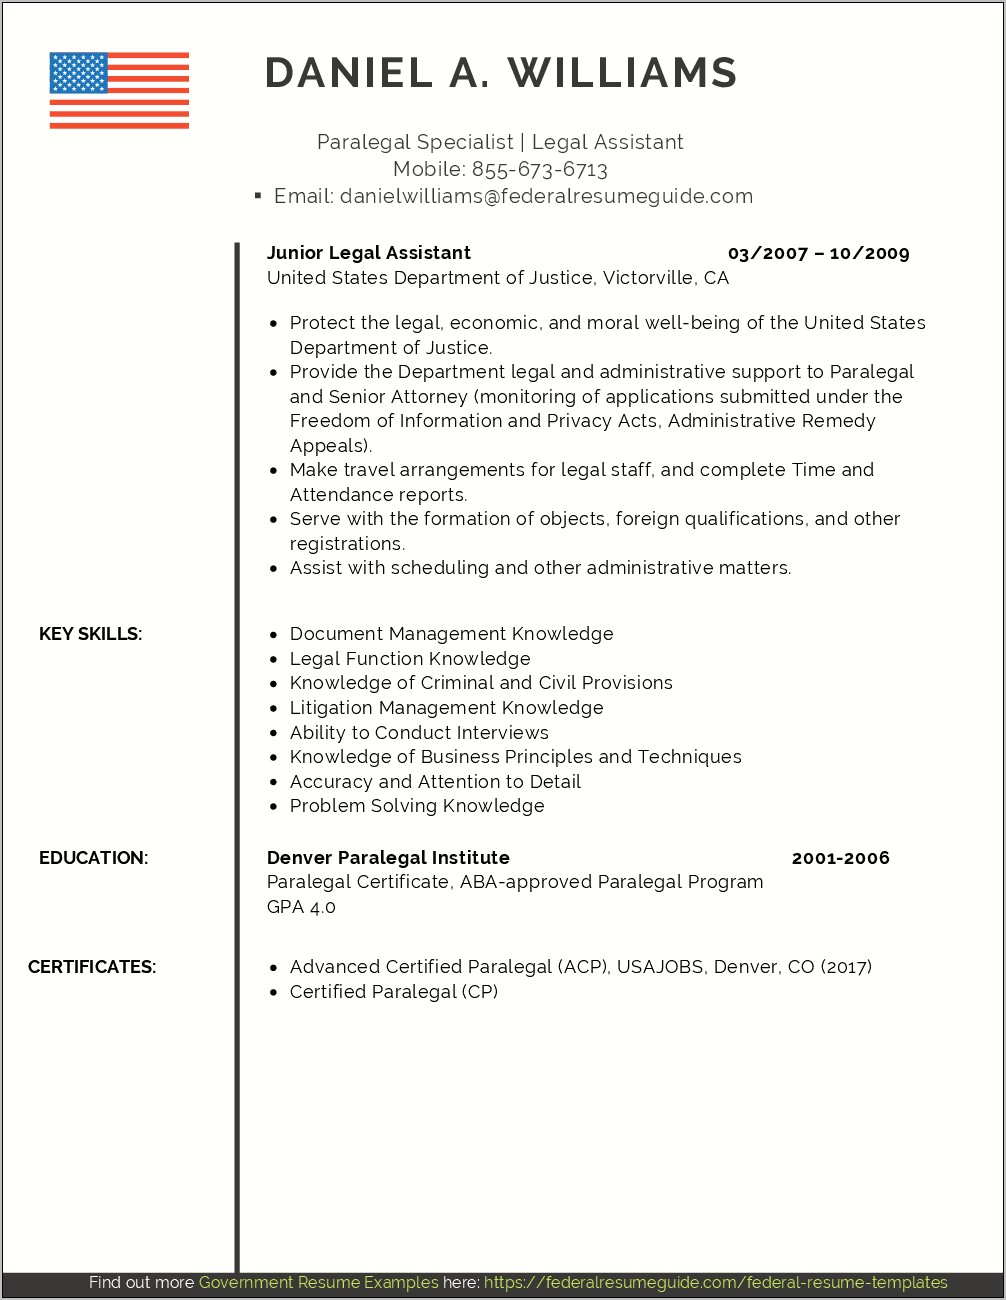 Federal Resume Duties Accomplishments And Related Skills